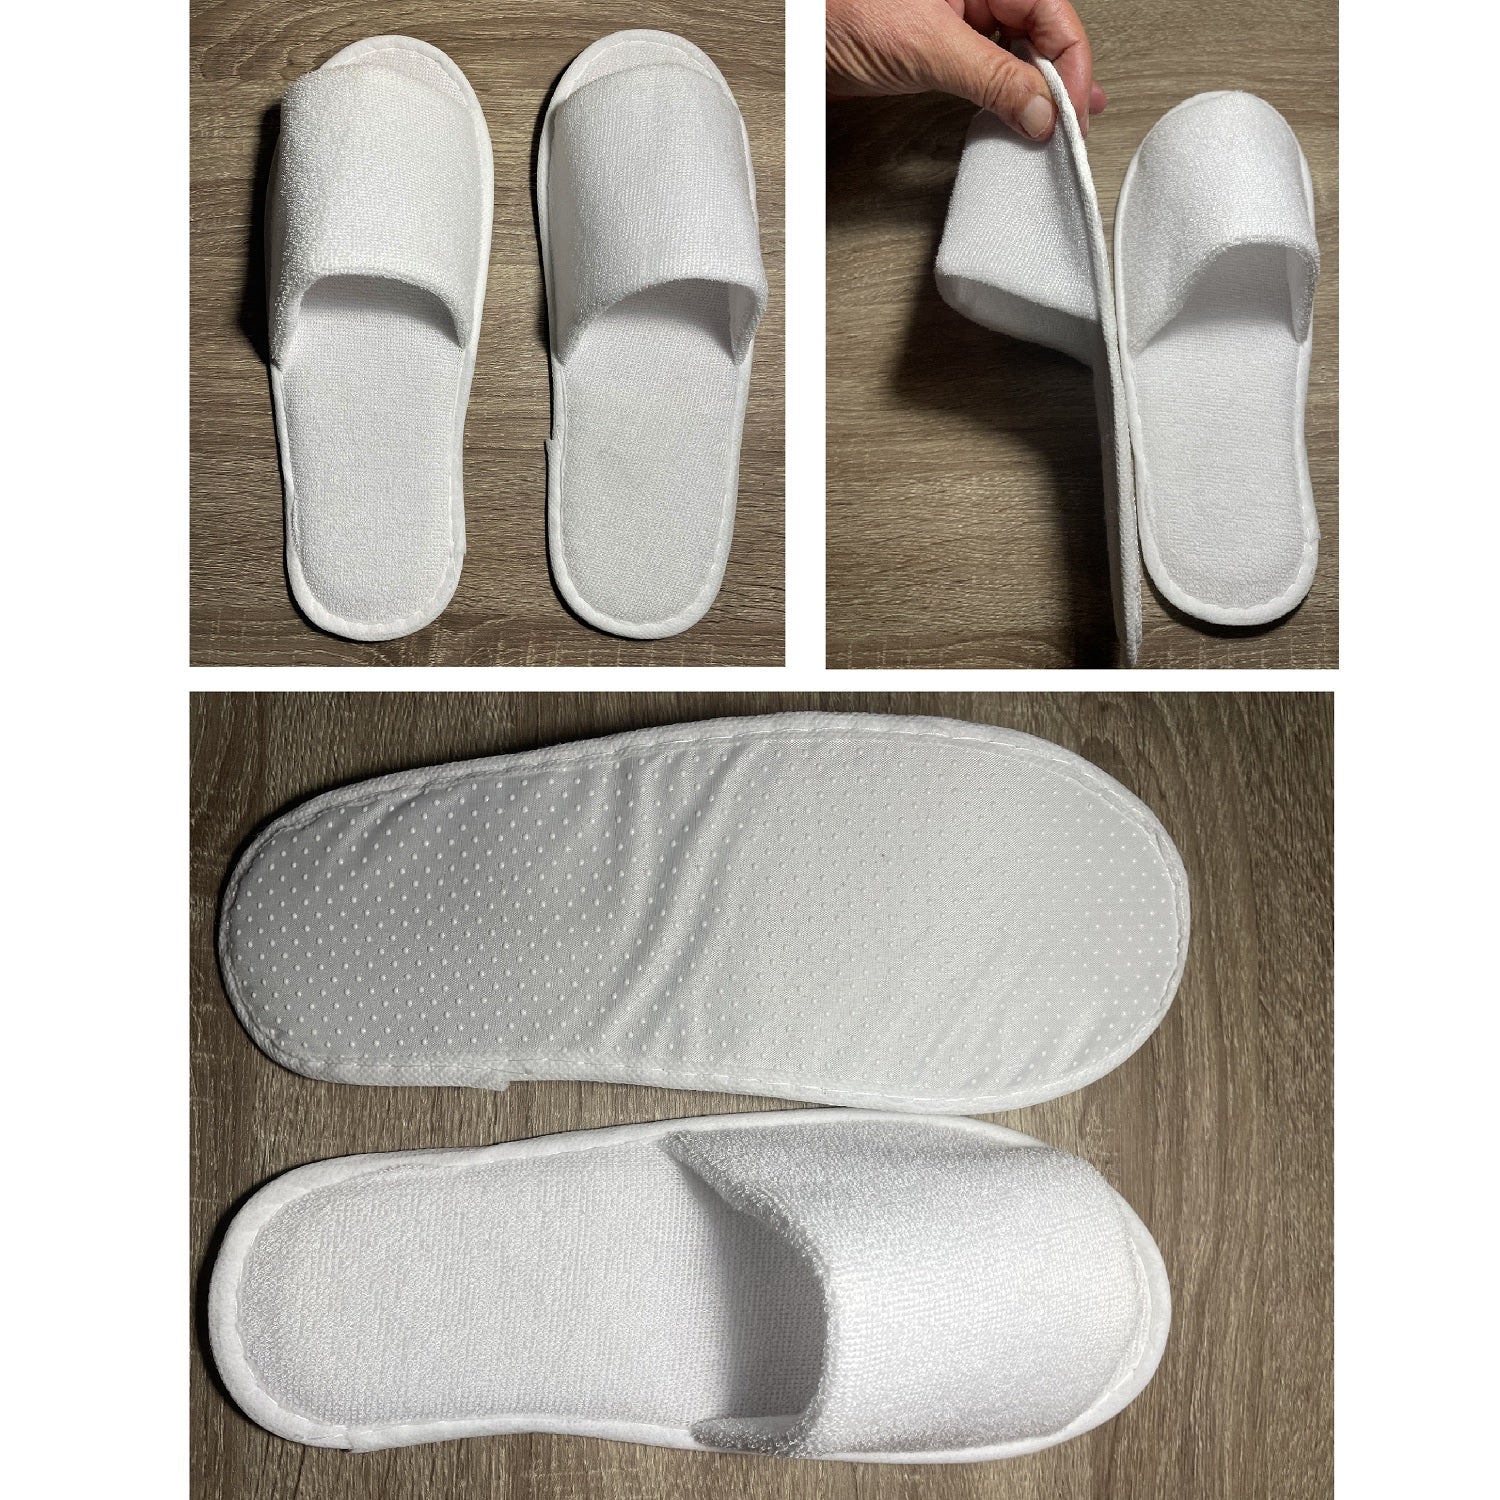 Lot 5/10/20/50/100 Pairs Unisex Hotel Slippers Spa Shoes Disposable | eBay